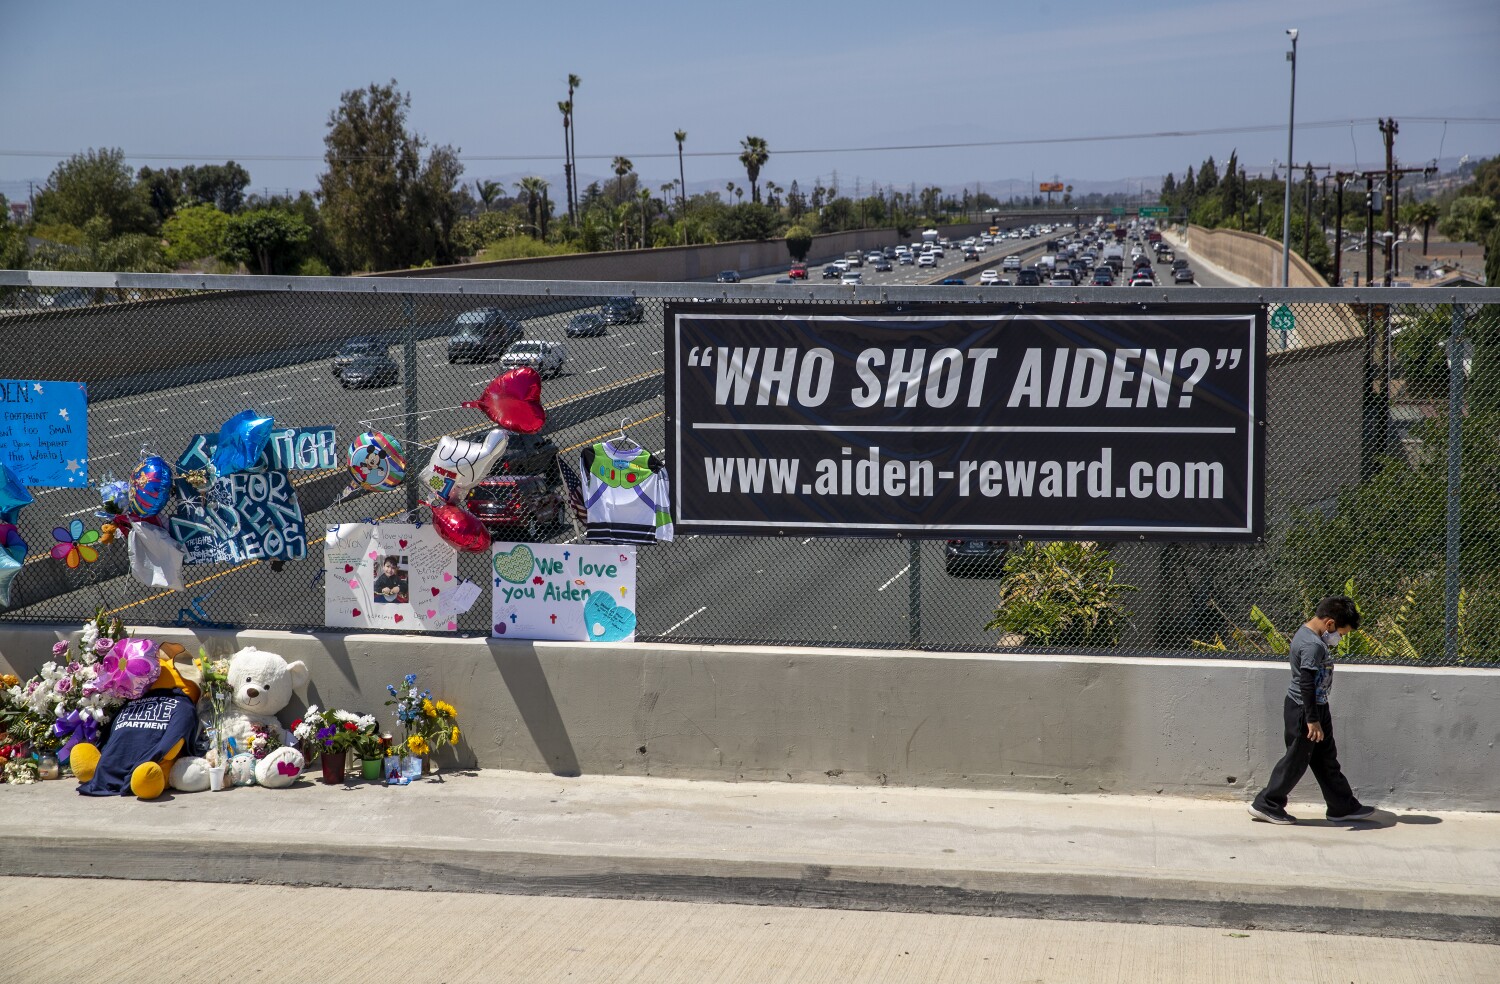 Couple charged in alleged road-rage killing of 6-year-old Aiden Leos will stand trial